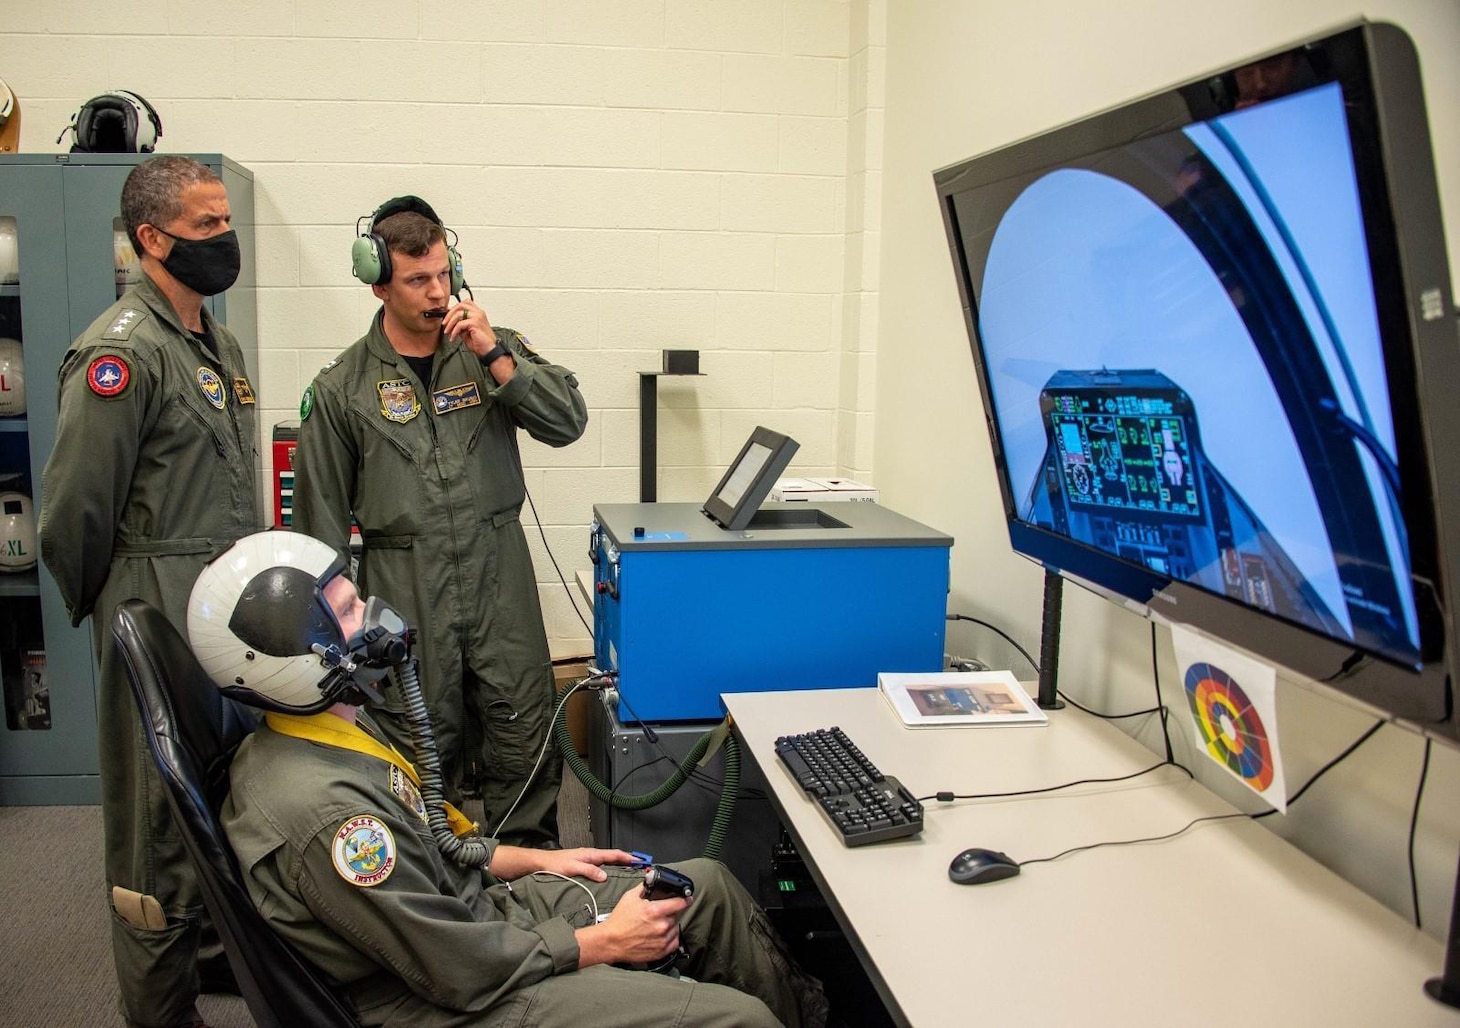 NAVAIR Commander Vice Adm. Carl Chebi (left) gets a firsthand look at the Mask on Breathing Device (MOBD) trainer July 7 at the Patuxent River Aviation Survival Training Center (ASTC). Flight Physiologist Lt. Tyler Grubic (right) demonstrated the effect of the different breathing distress profiles on subject Electronic Warfare Systems Specialist 1 Shawn Bell (center). The MOBD trainer will be available at all eight ASTC locations later this year.